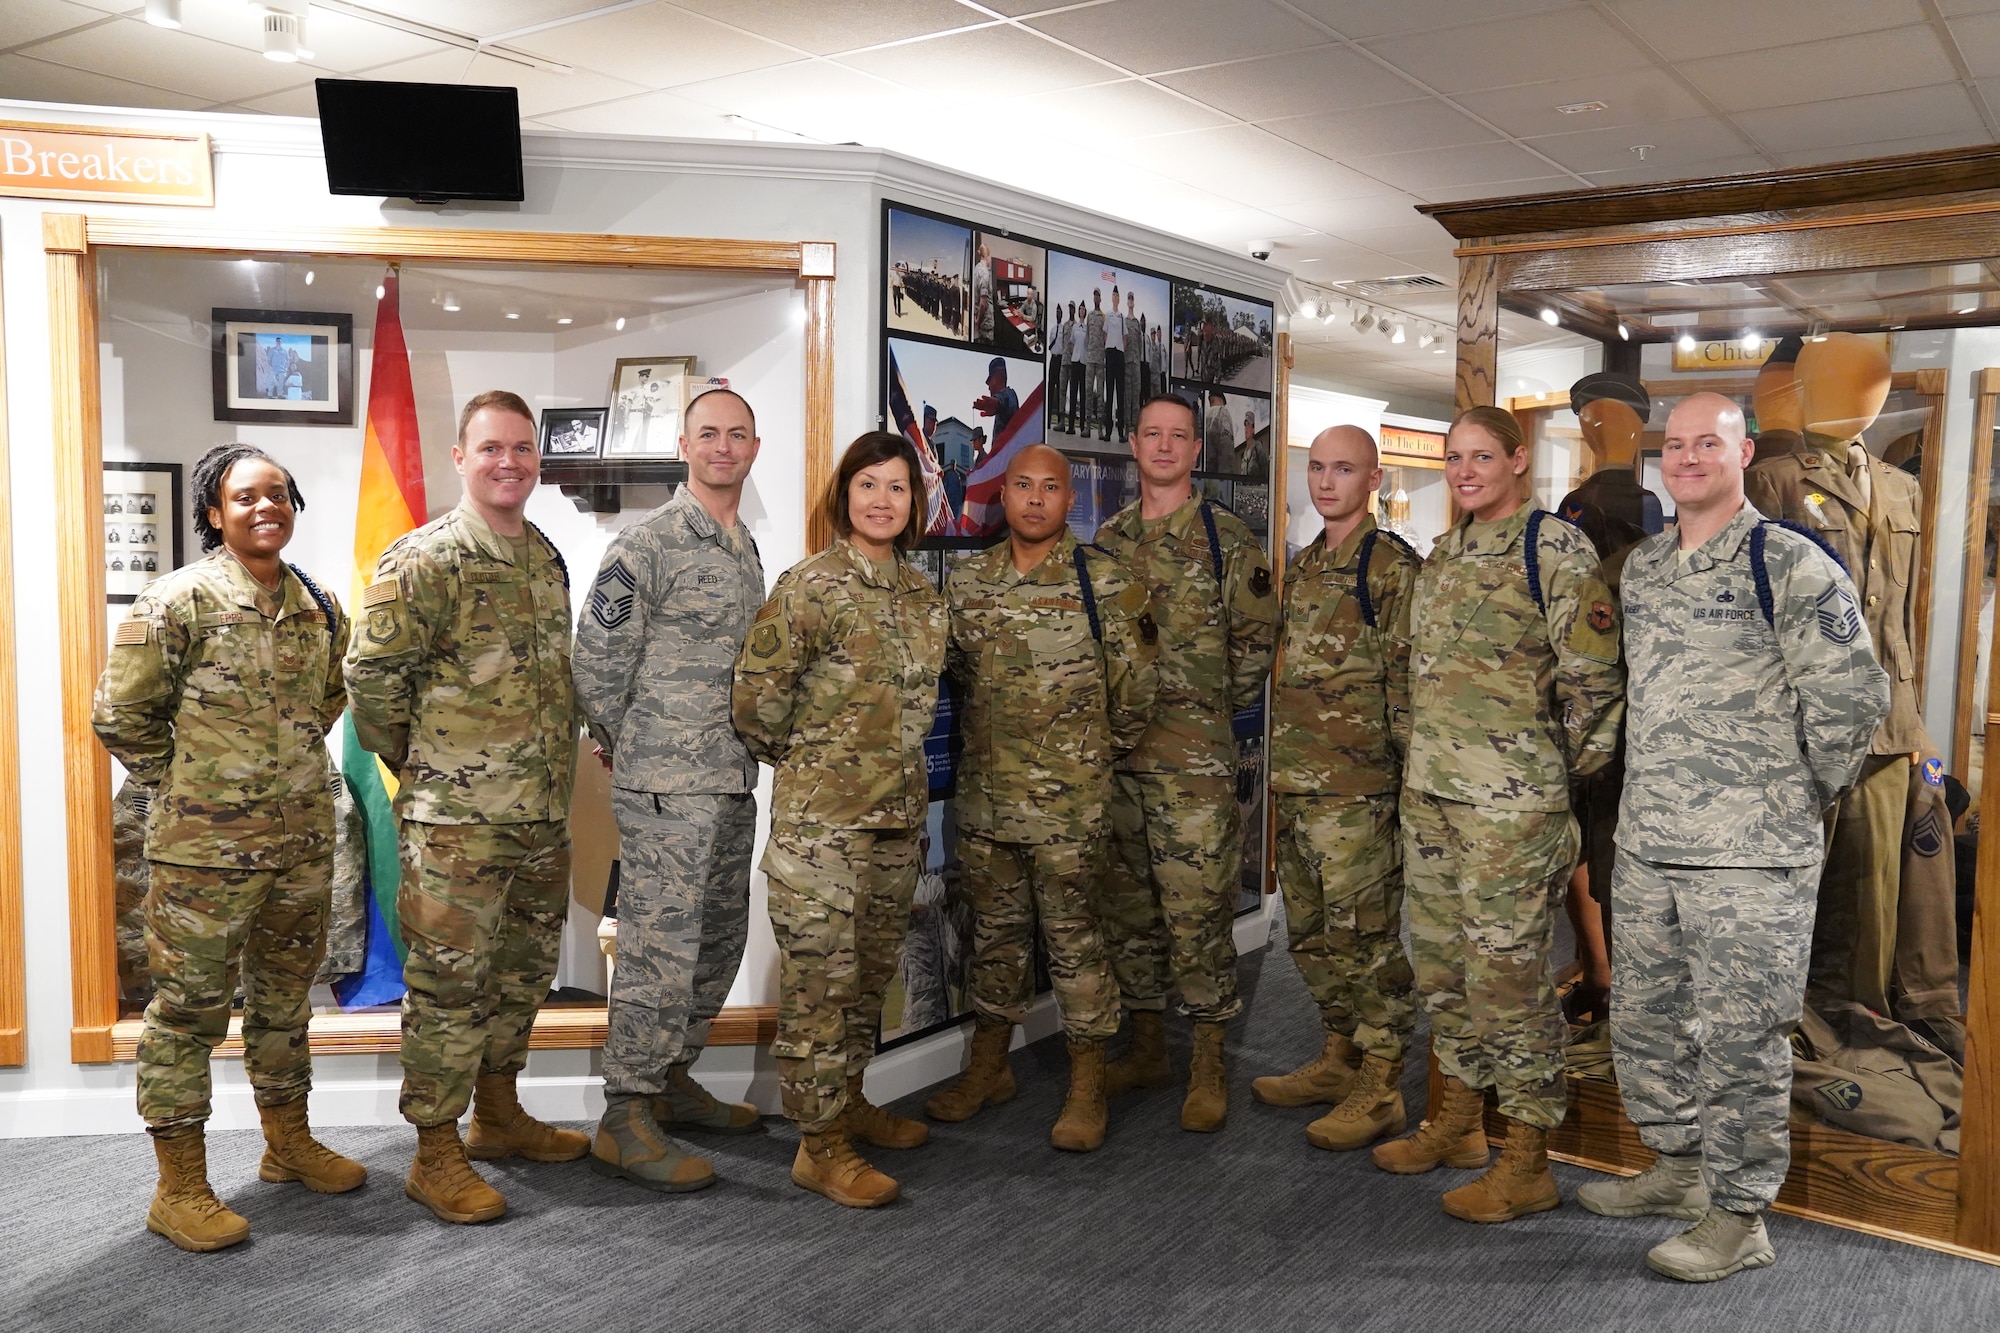 Second Air Force leadership and military training leaders pose for a photo in front of the MTL wall at the Air Force Enlisted Heritage Hall at Maxwell Air Force Base Gunter Annex, Alabama, Oct. 30, 2019. MTLs play a vital role in the development of the next generation of Air Force leaders, warfighters, and protectors of freedom. The Air Force Enlisted Heritage Hall has dedicated a wall to highlight their lineage and contributions to the Air Force. (U.S Air Force photo by Airman 1st Class Spencer Tobler)